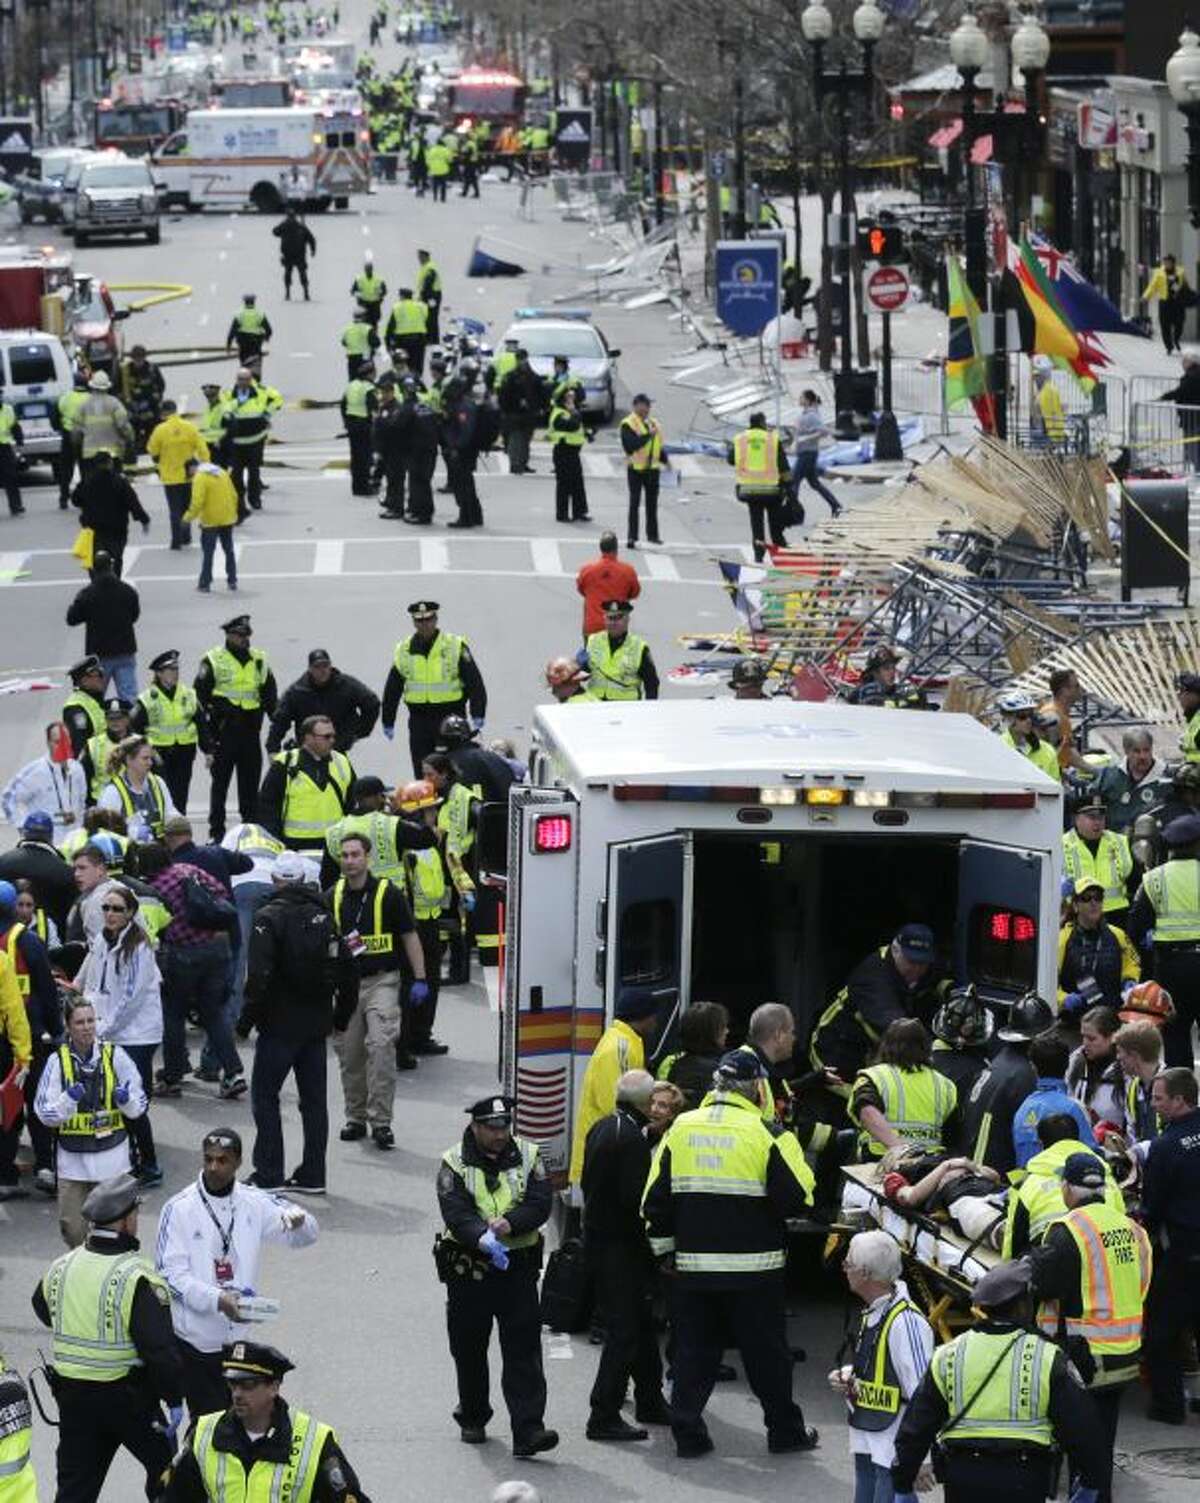 Medical workers aid injured people at the finish line of the 2013 Boston Marathon following an explosion in Boston, Monday, April 15, 2013. Two explosions shattered the euphoria of the Boston Marathon finish line on Monday, sending authorities out on the course to carry off the injured while the stragglers were rerouted away from the smoking site of the blasts. (AP Photo/Charles Krupa)